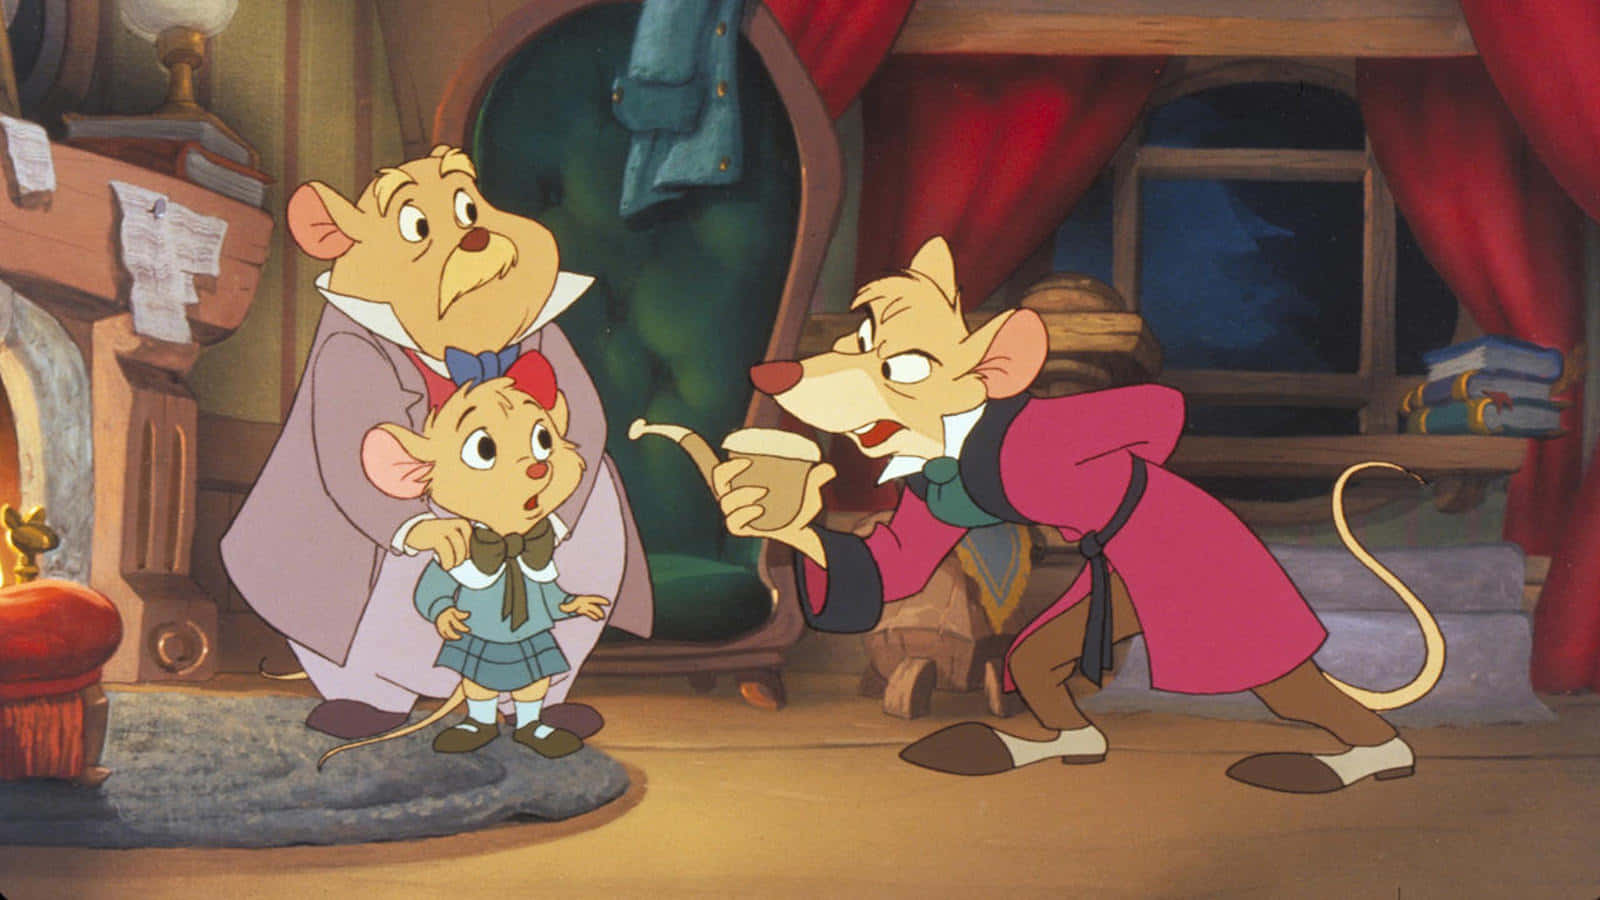 The Great Mouse Detective - Basil and Dr. Dawson in action Wallpaper